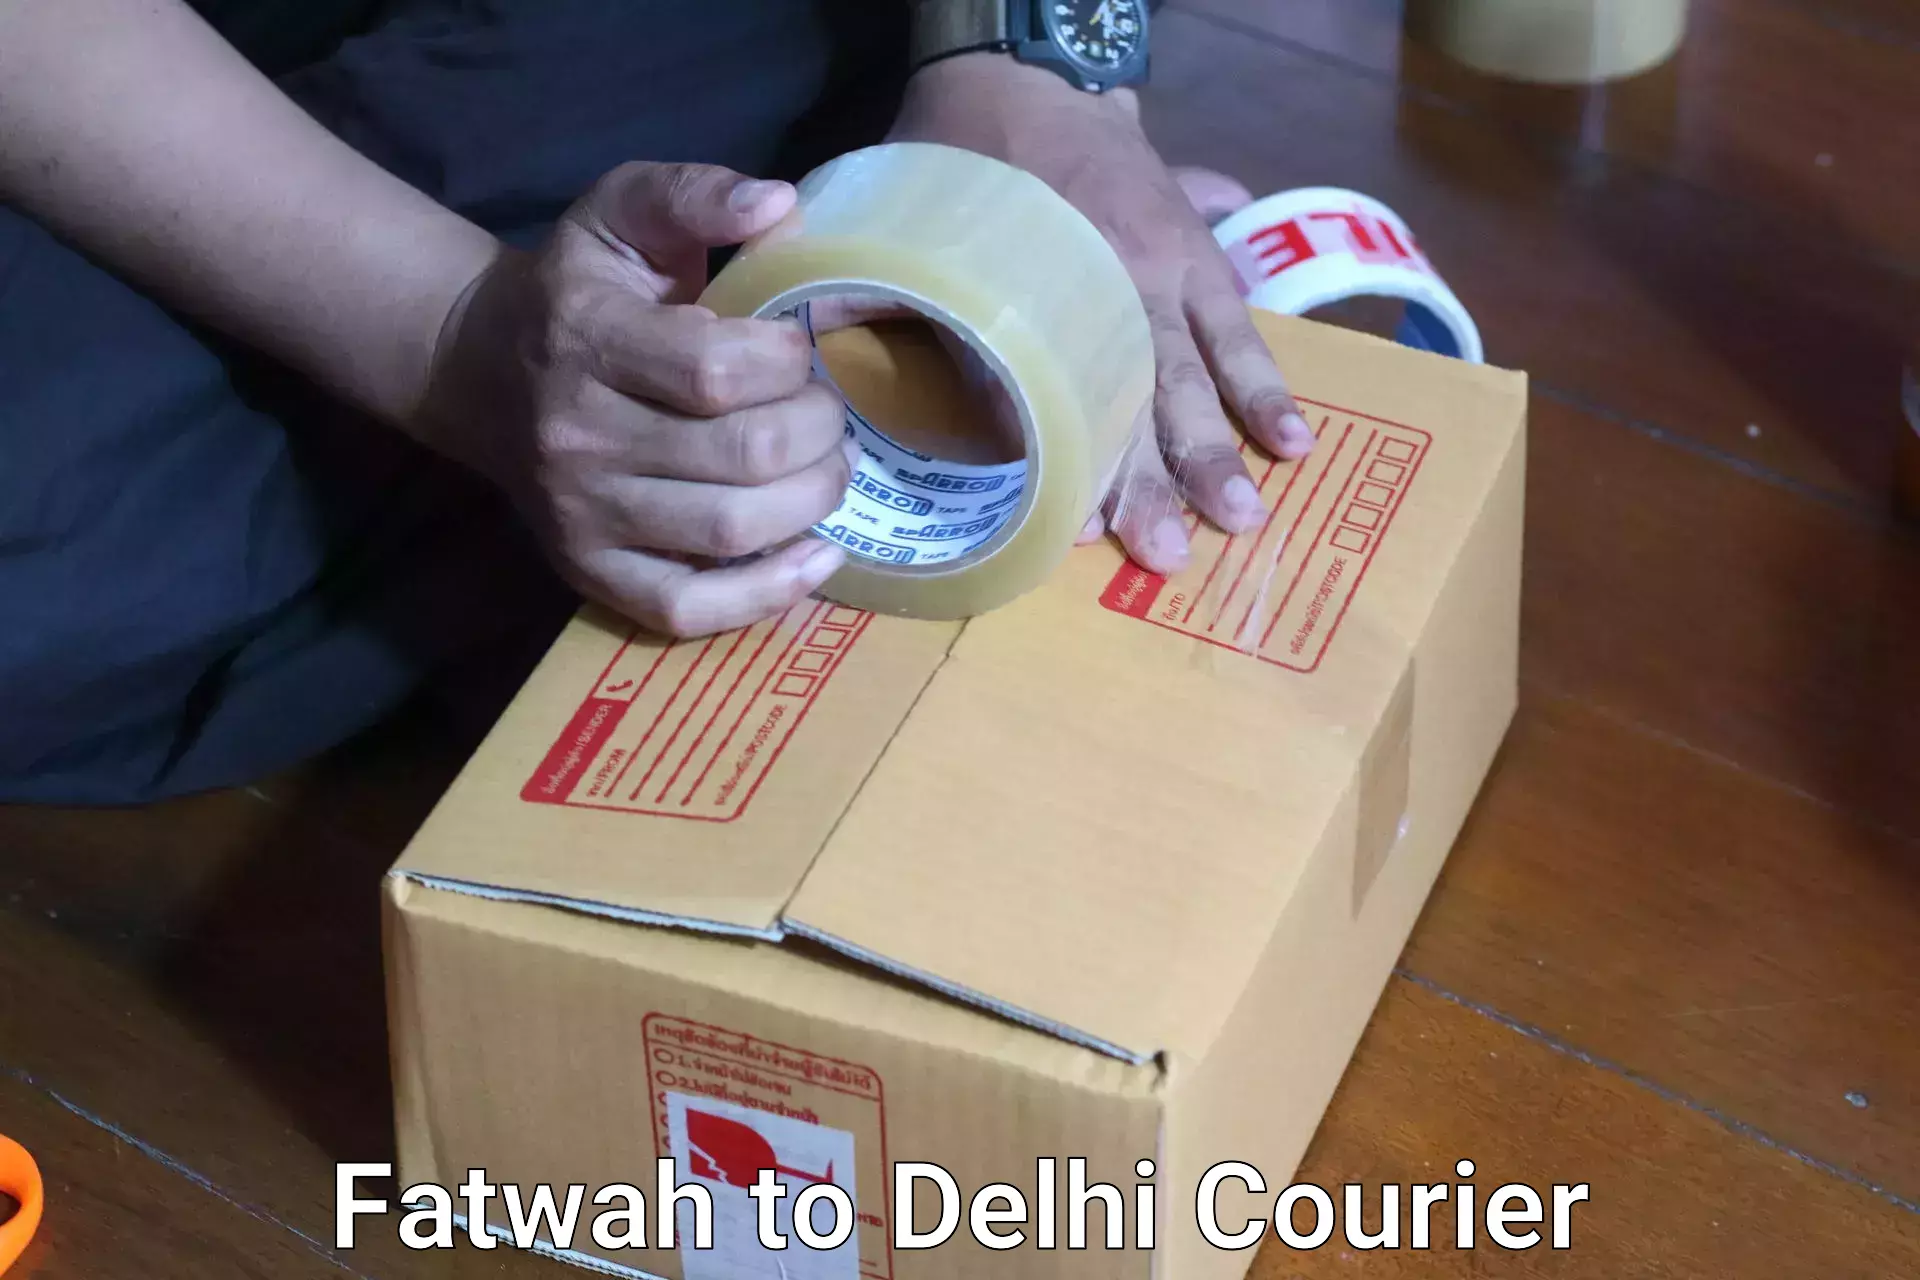 Hassle-free luggage shipping Fatwah to Delhi Technological University DTU